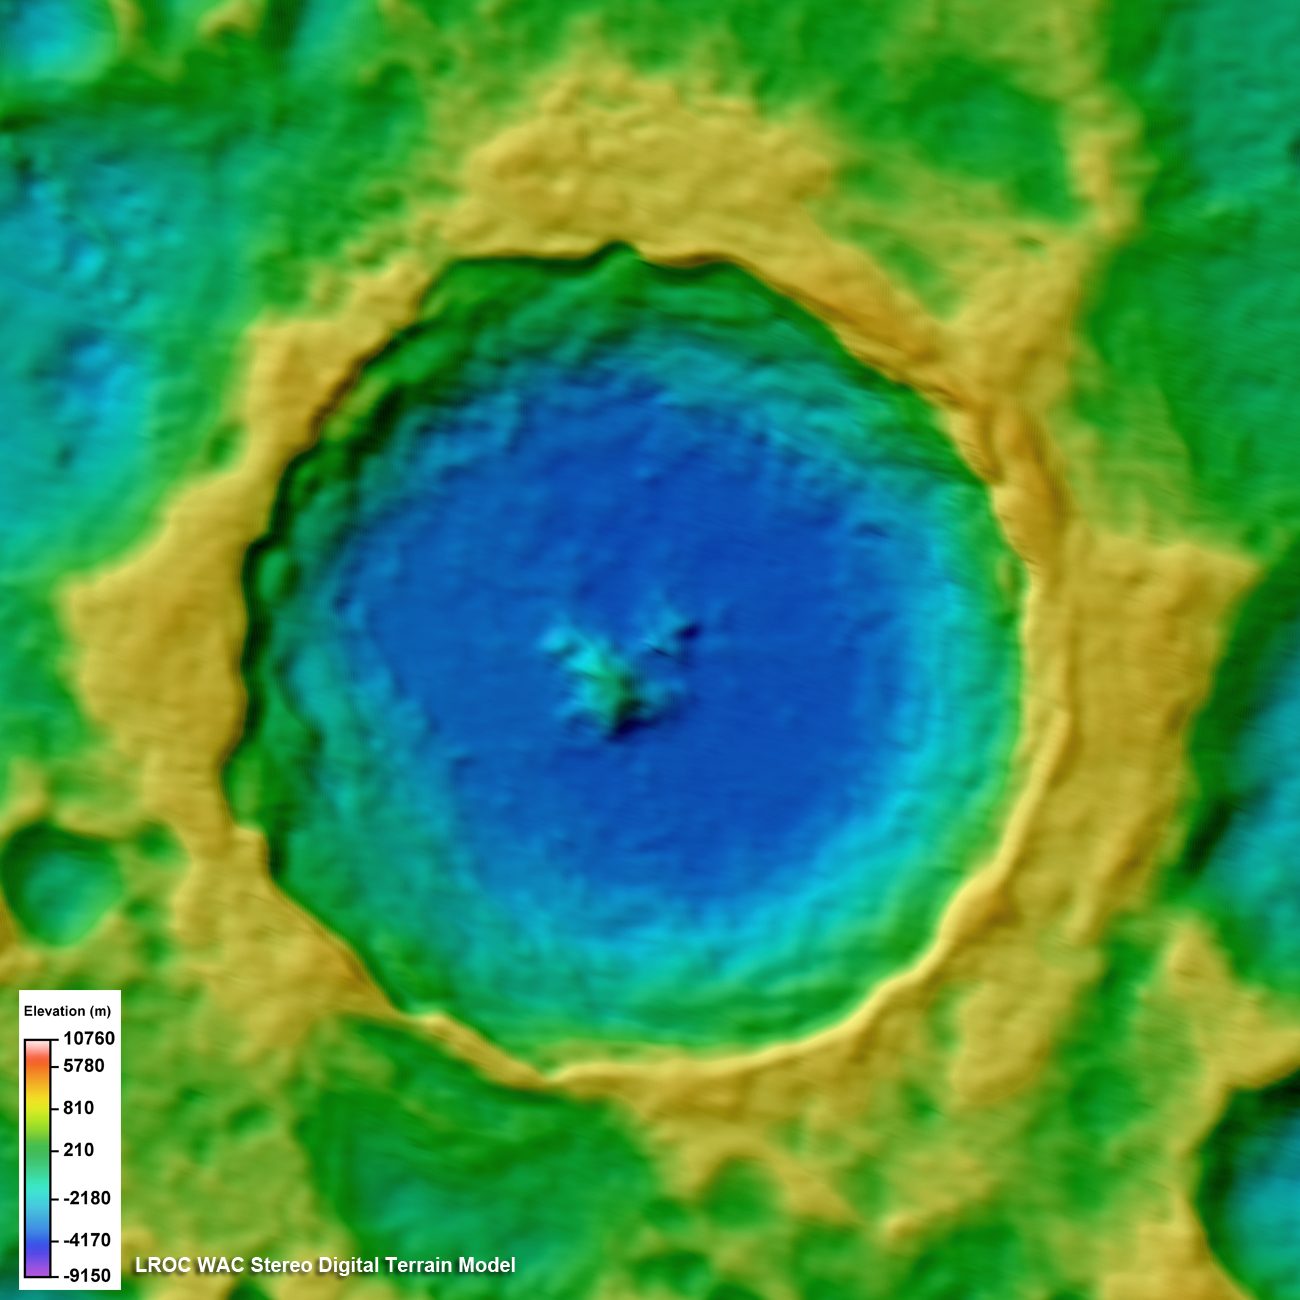 Topographic color-shaded relief model image of Tycho crater with labeled color scale.